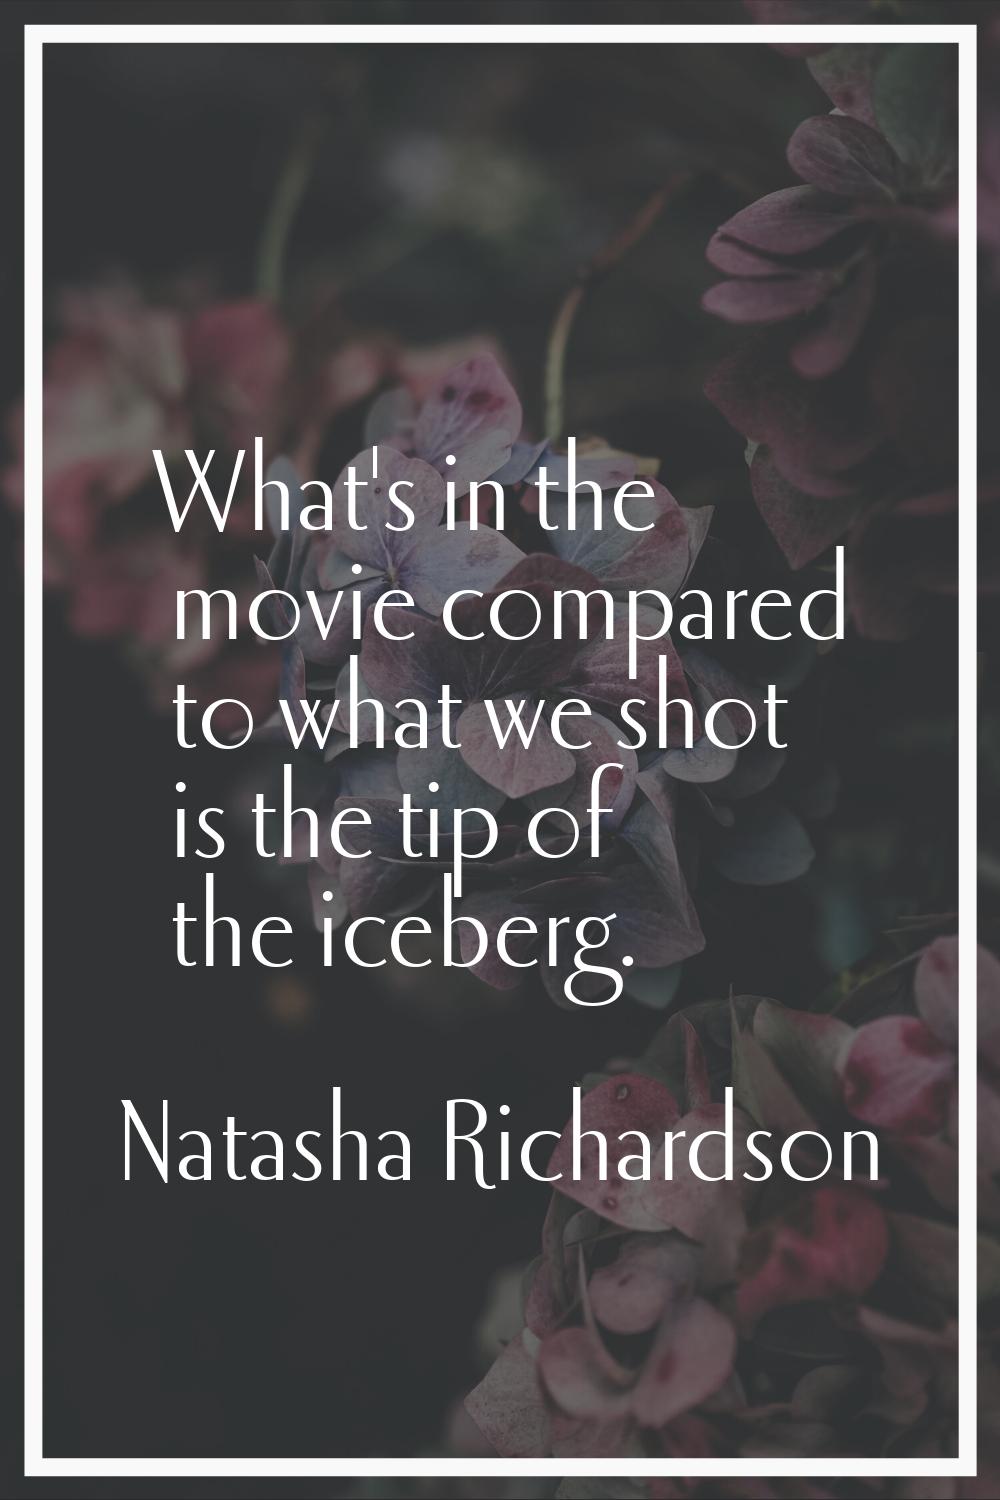 What's in the movie compared to what we shot is the tip of the iceberg.